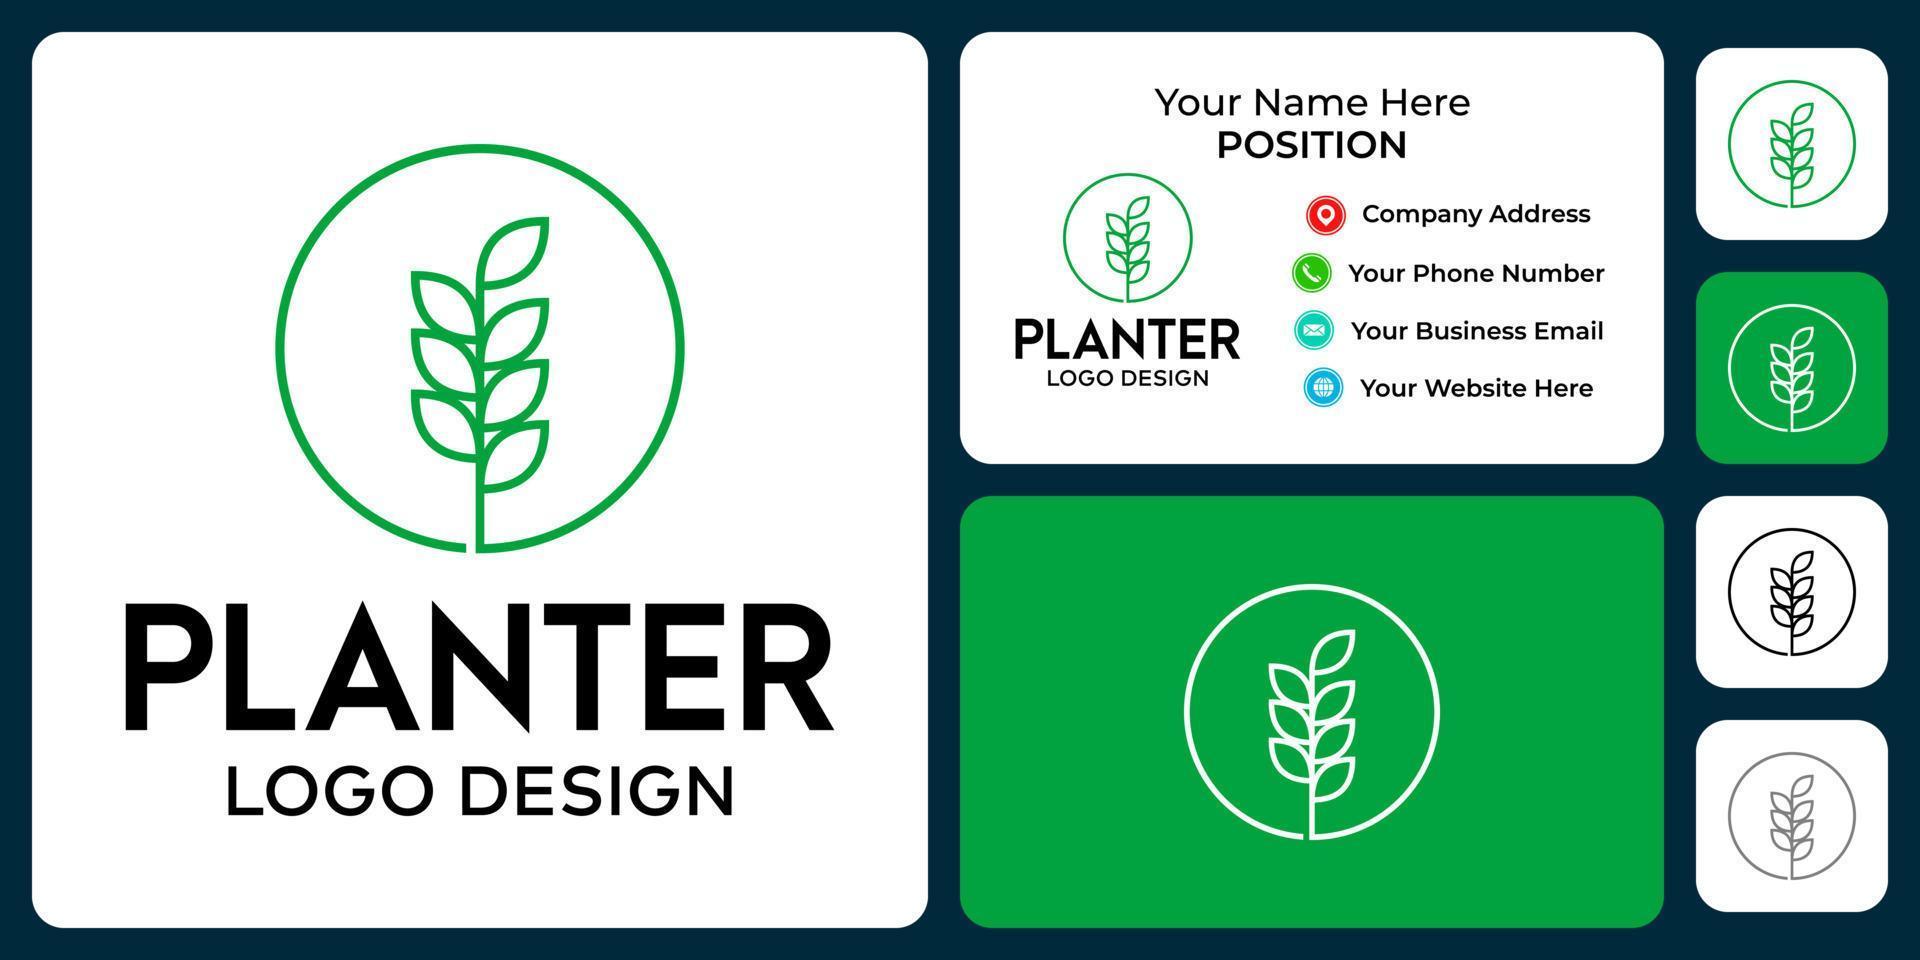 Planter circle logo design with business card template. vector